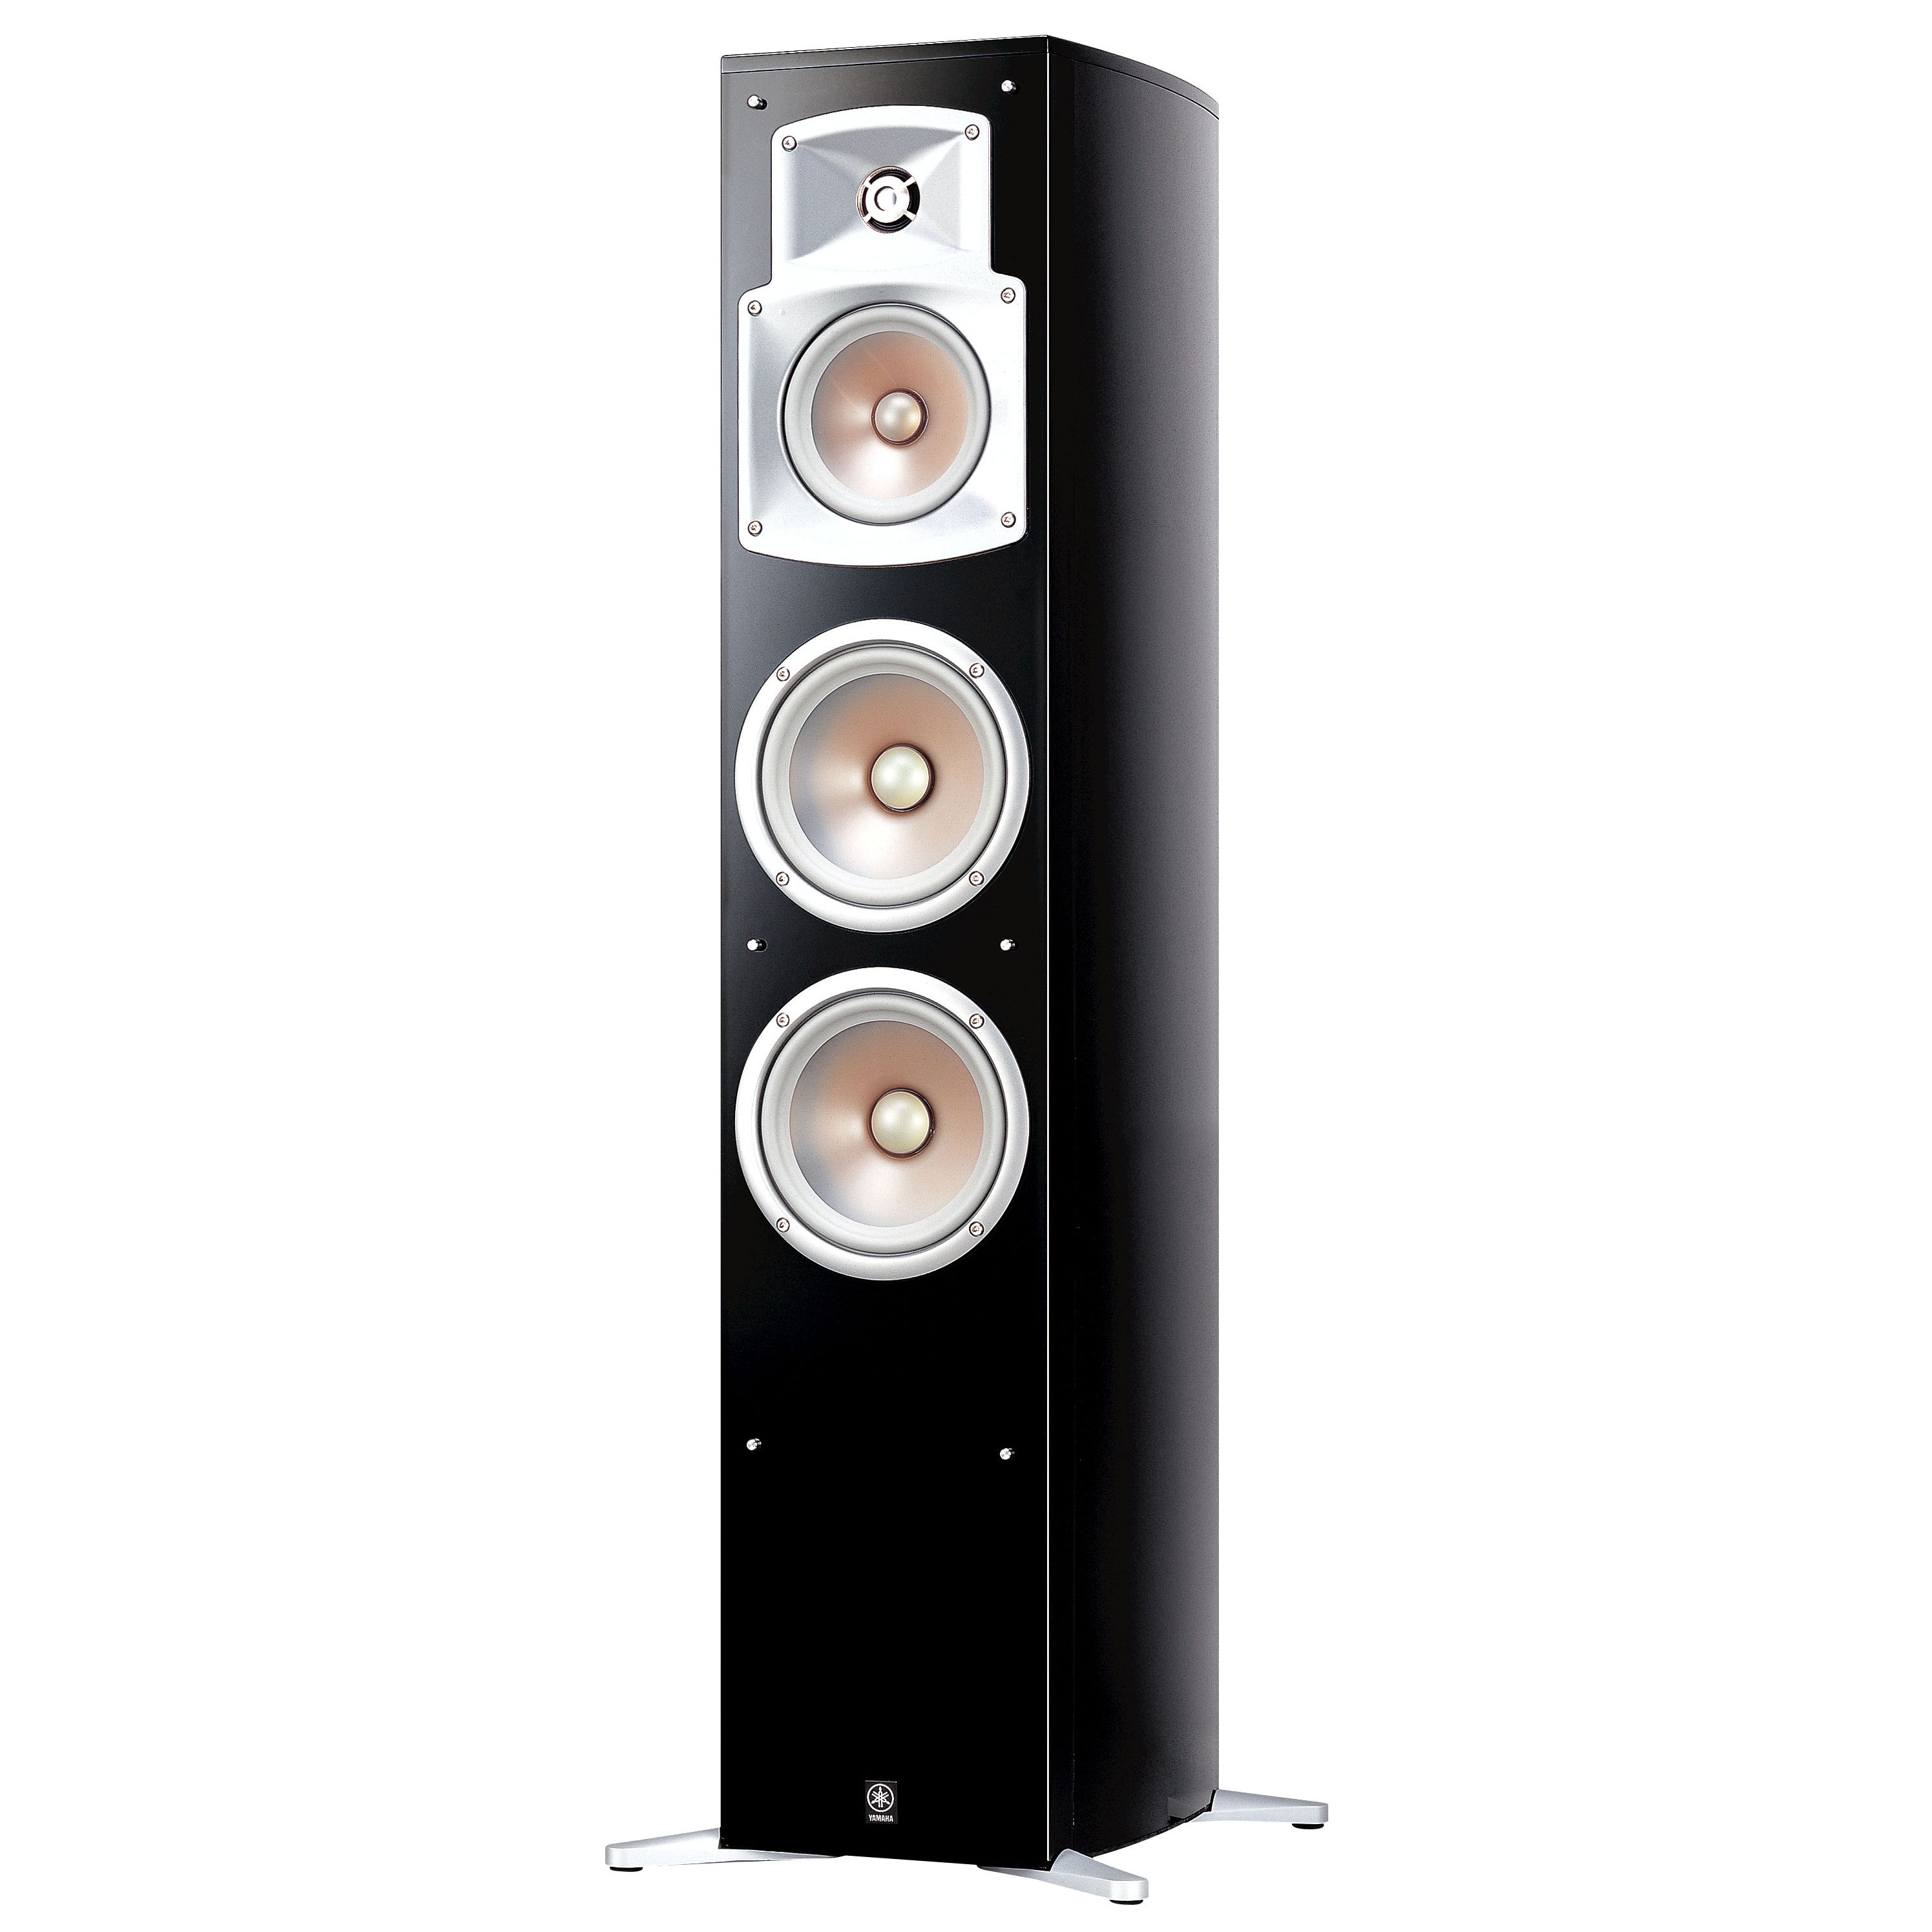 Ns 555 Overview Speakers Audio And Visual Products Yamaha